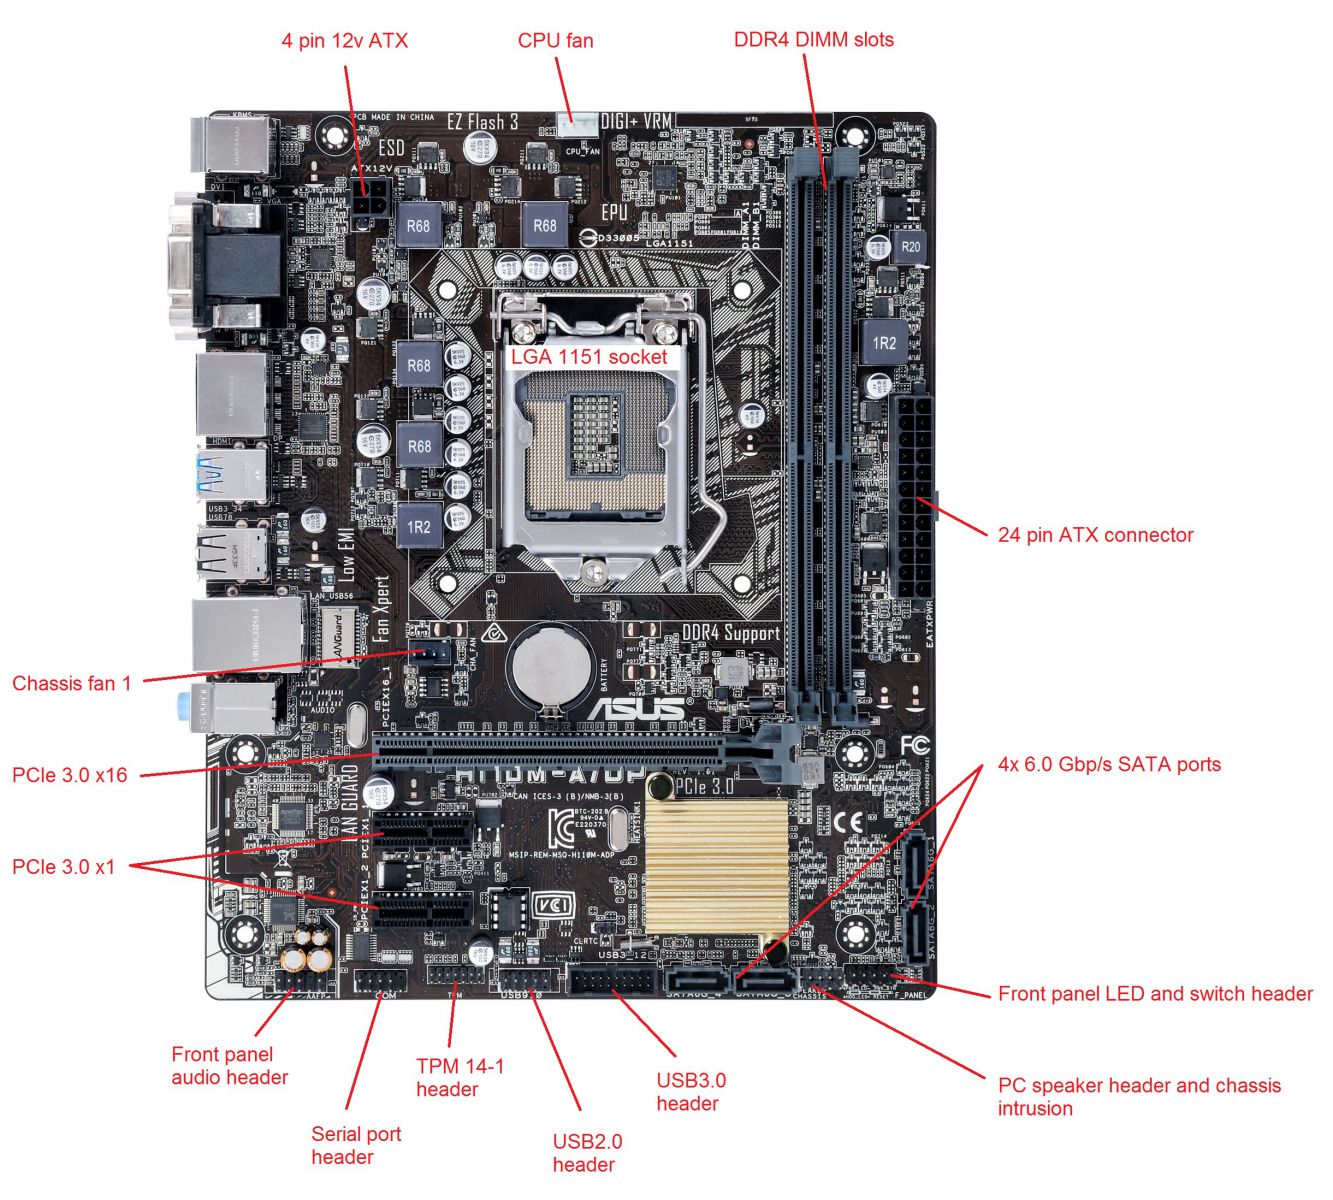 BOAMOT-481 - Stone / Asus H110M-A/DP - Motherboard Specification ...